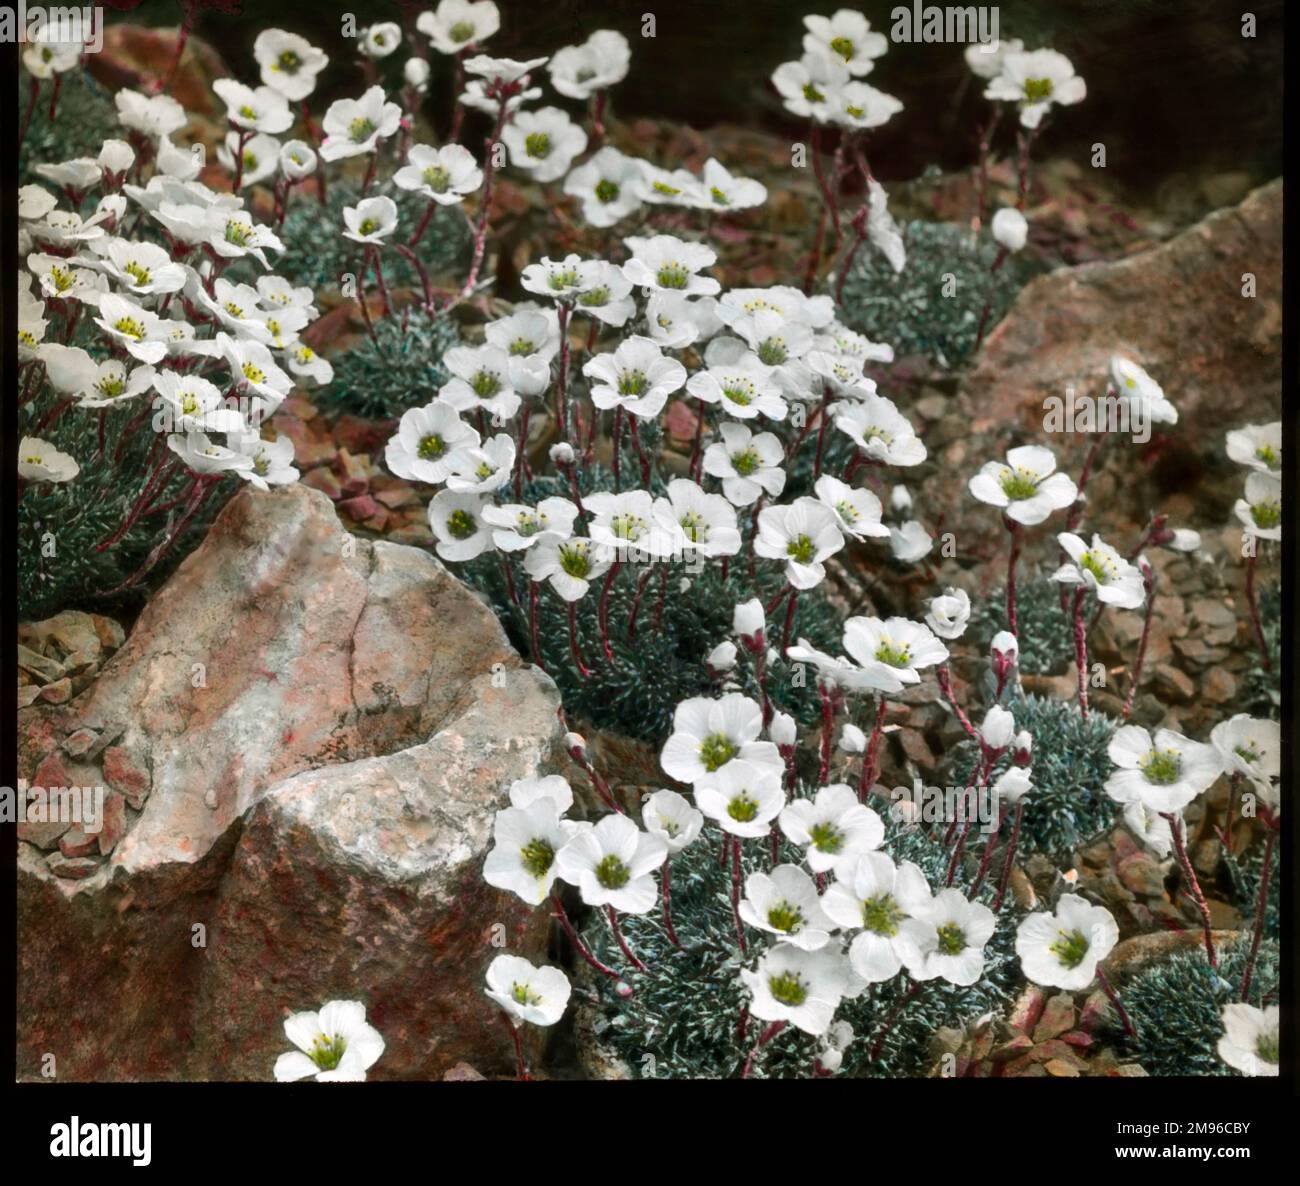 Saxifraga Burseriana Gloria, a flowering plant of the Saxifragaceae family (commonly known as saxifrages or stone breakers because of their ability to grow in the cracks between rocks).  Seen here growing in a rocky setting, with white flowers. Stock Photo